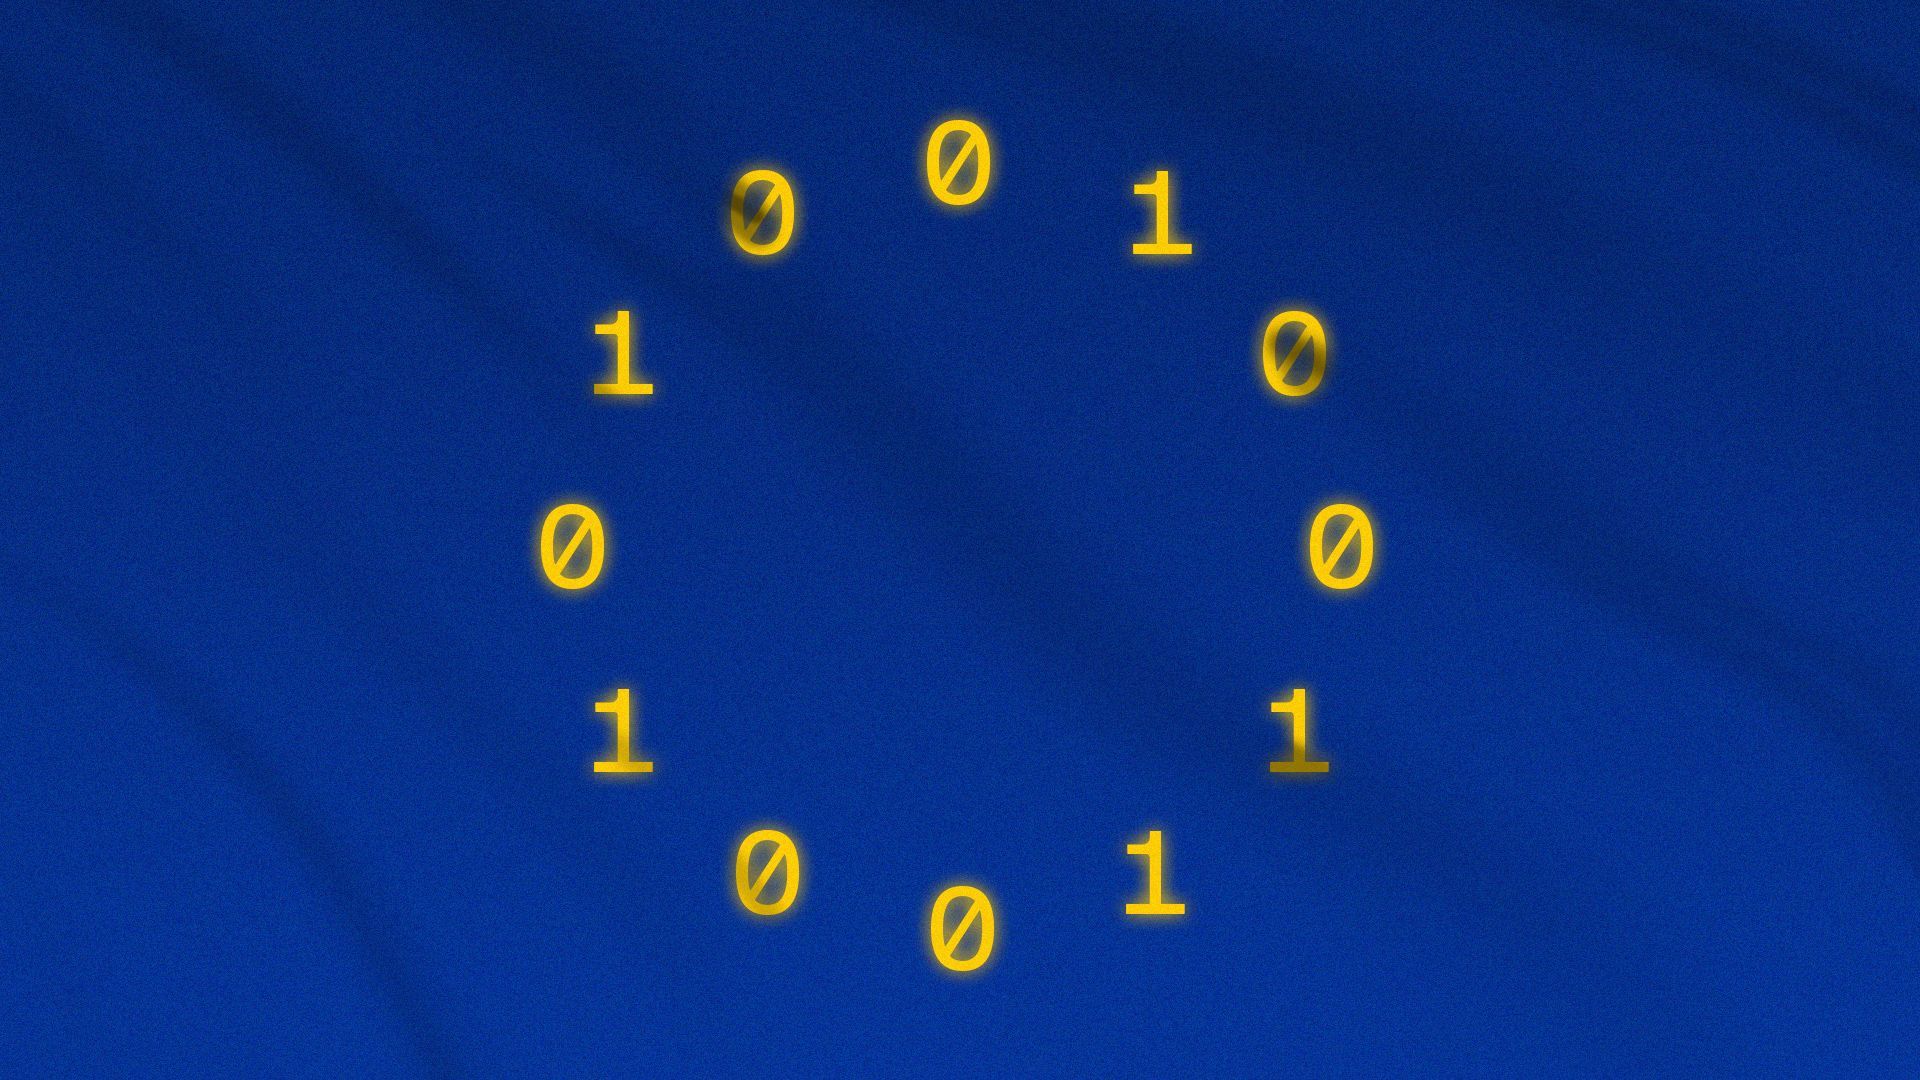 Illustration of the EU flag with binary code instead of stars.  